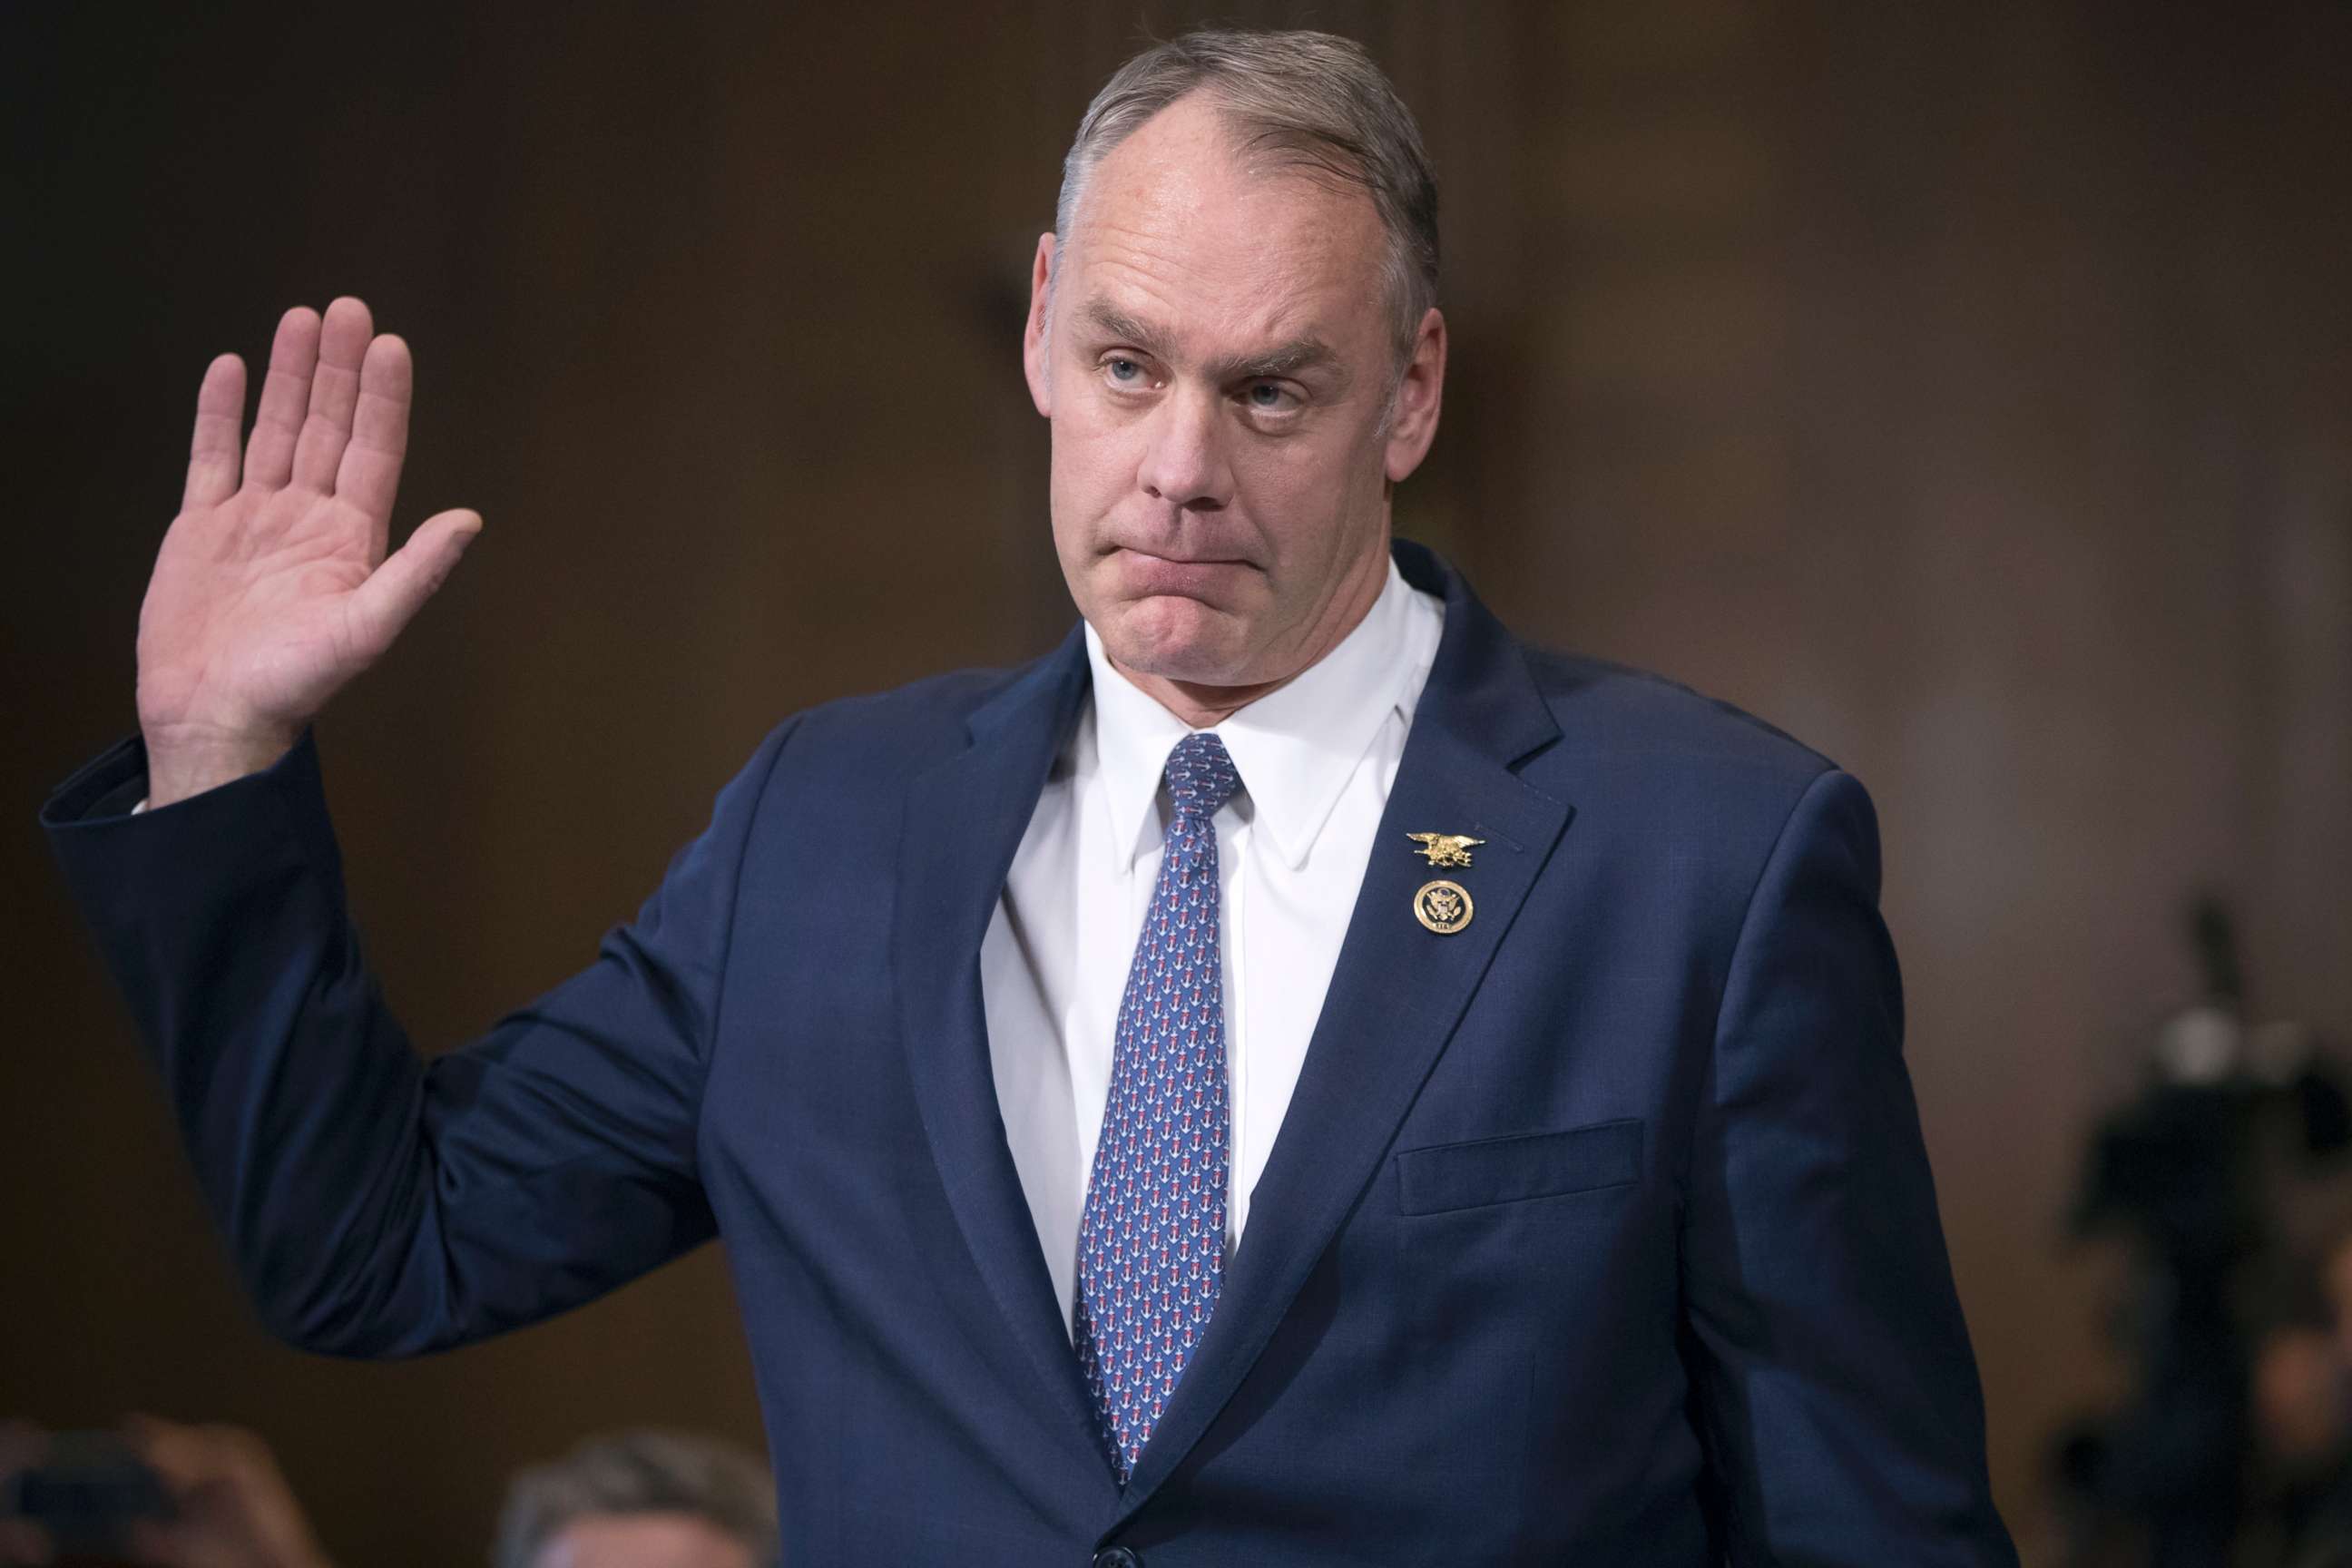 PHOTO: Representative Ryan Zinke, a former Navy SEAL commander, testifies before a Senate Energy and Natural Resources Committee confirmation hearing on his nomination to be Interior Secretary at Capitol Hill in Washington, Jan. 17, 2017.